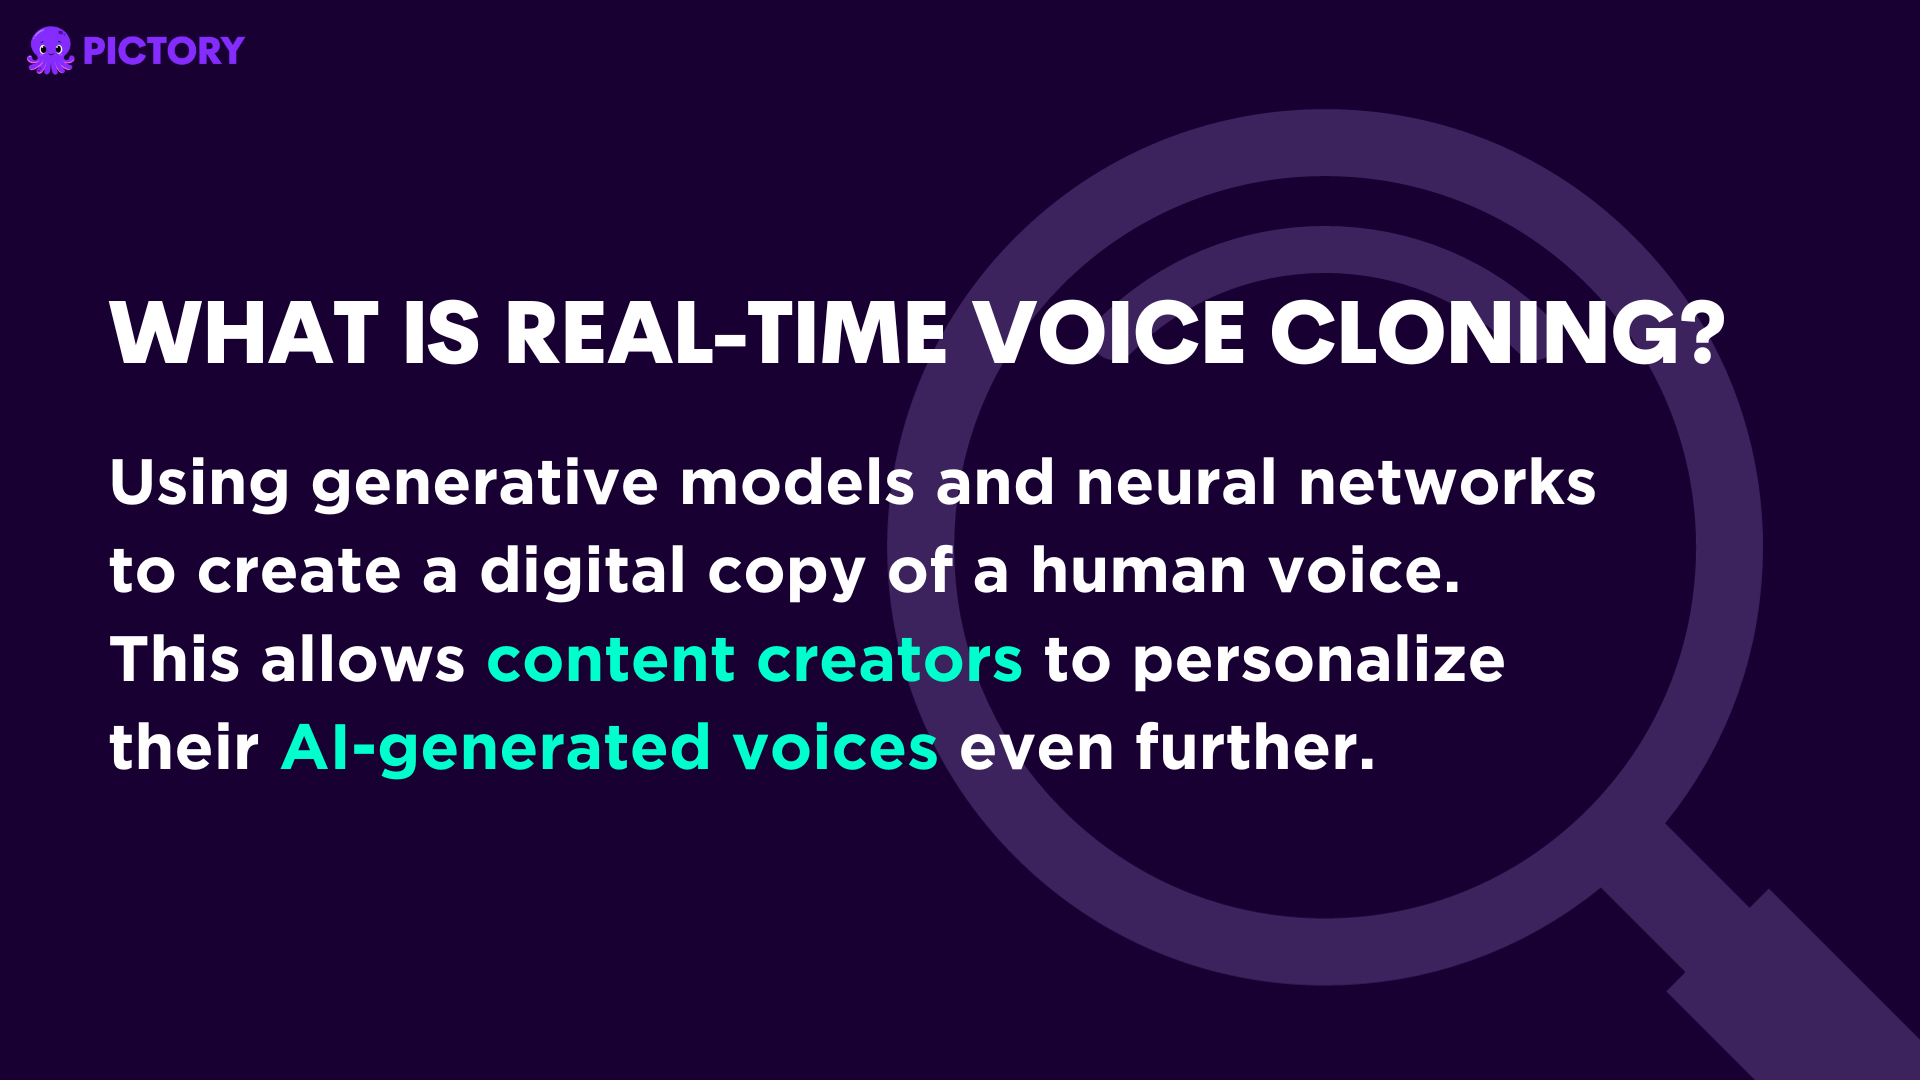 AI voice technology is real-time voice cloning